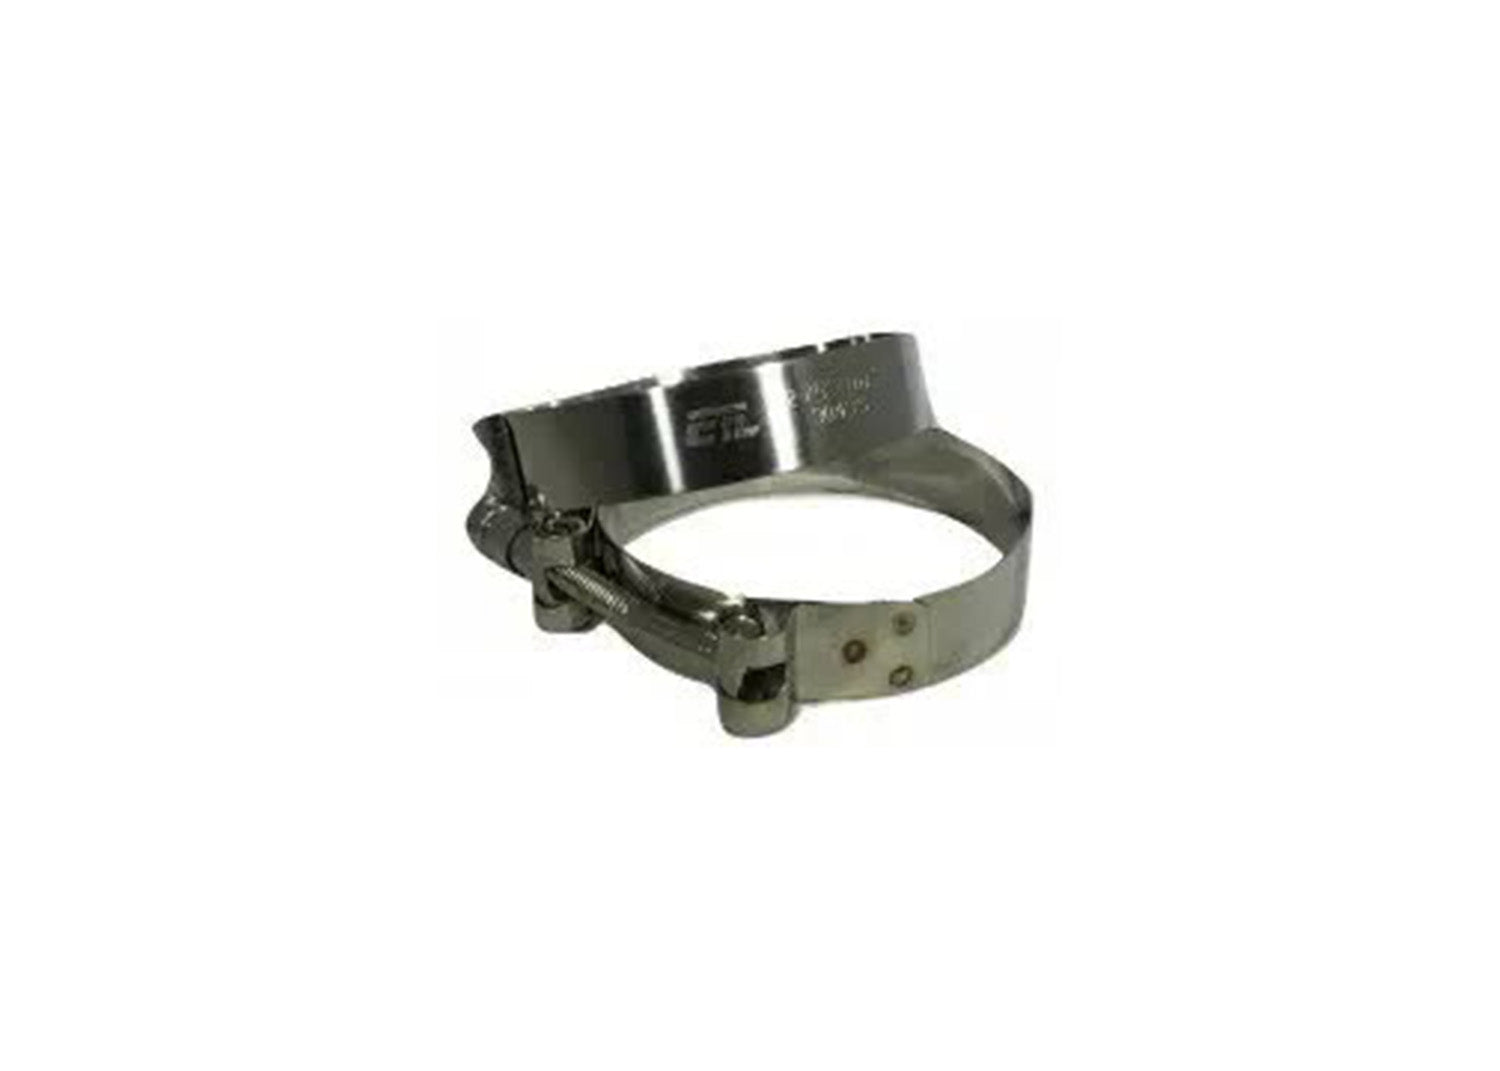 T-Bolt Clamp for use with 1.00" or 1.25" Inside Diameter Hose Couplings Part Number-221001